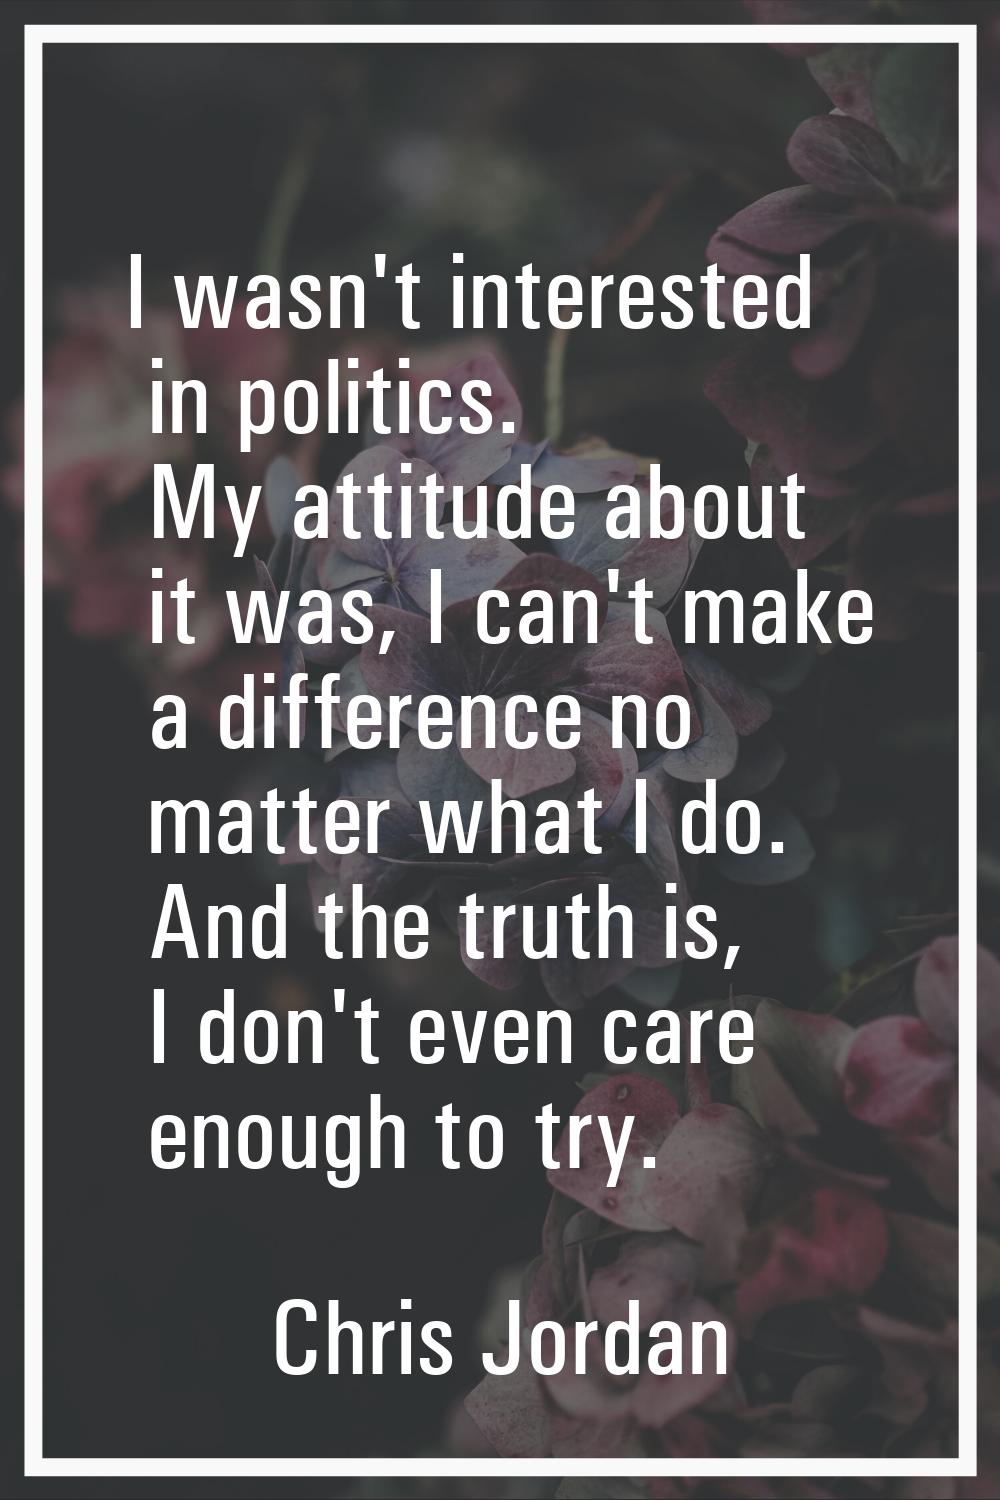 I wasn't interested in politics. My attitude about it was, I can't make a difference no matter what